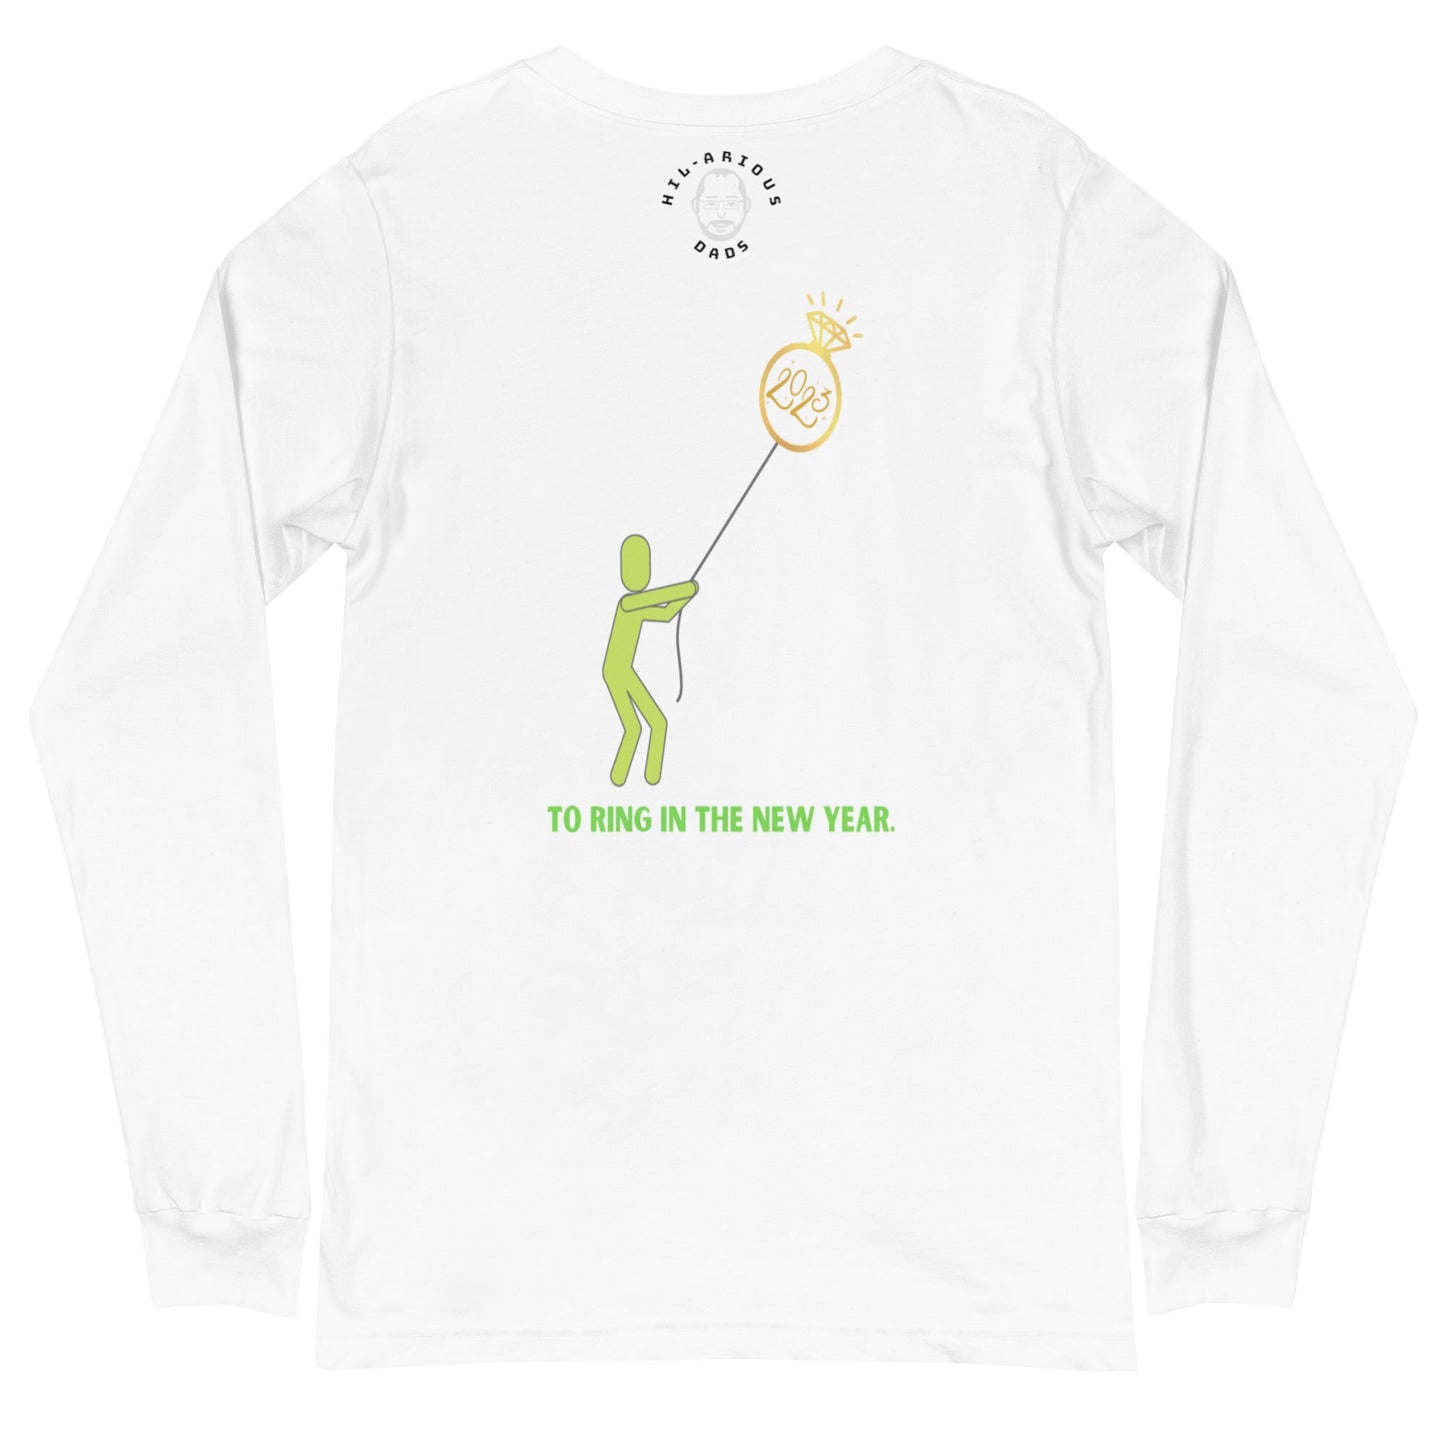 Why do you need a jeweler on New Year's Eve?-Long Sleeve Tee - Hil-arious Dads